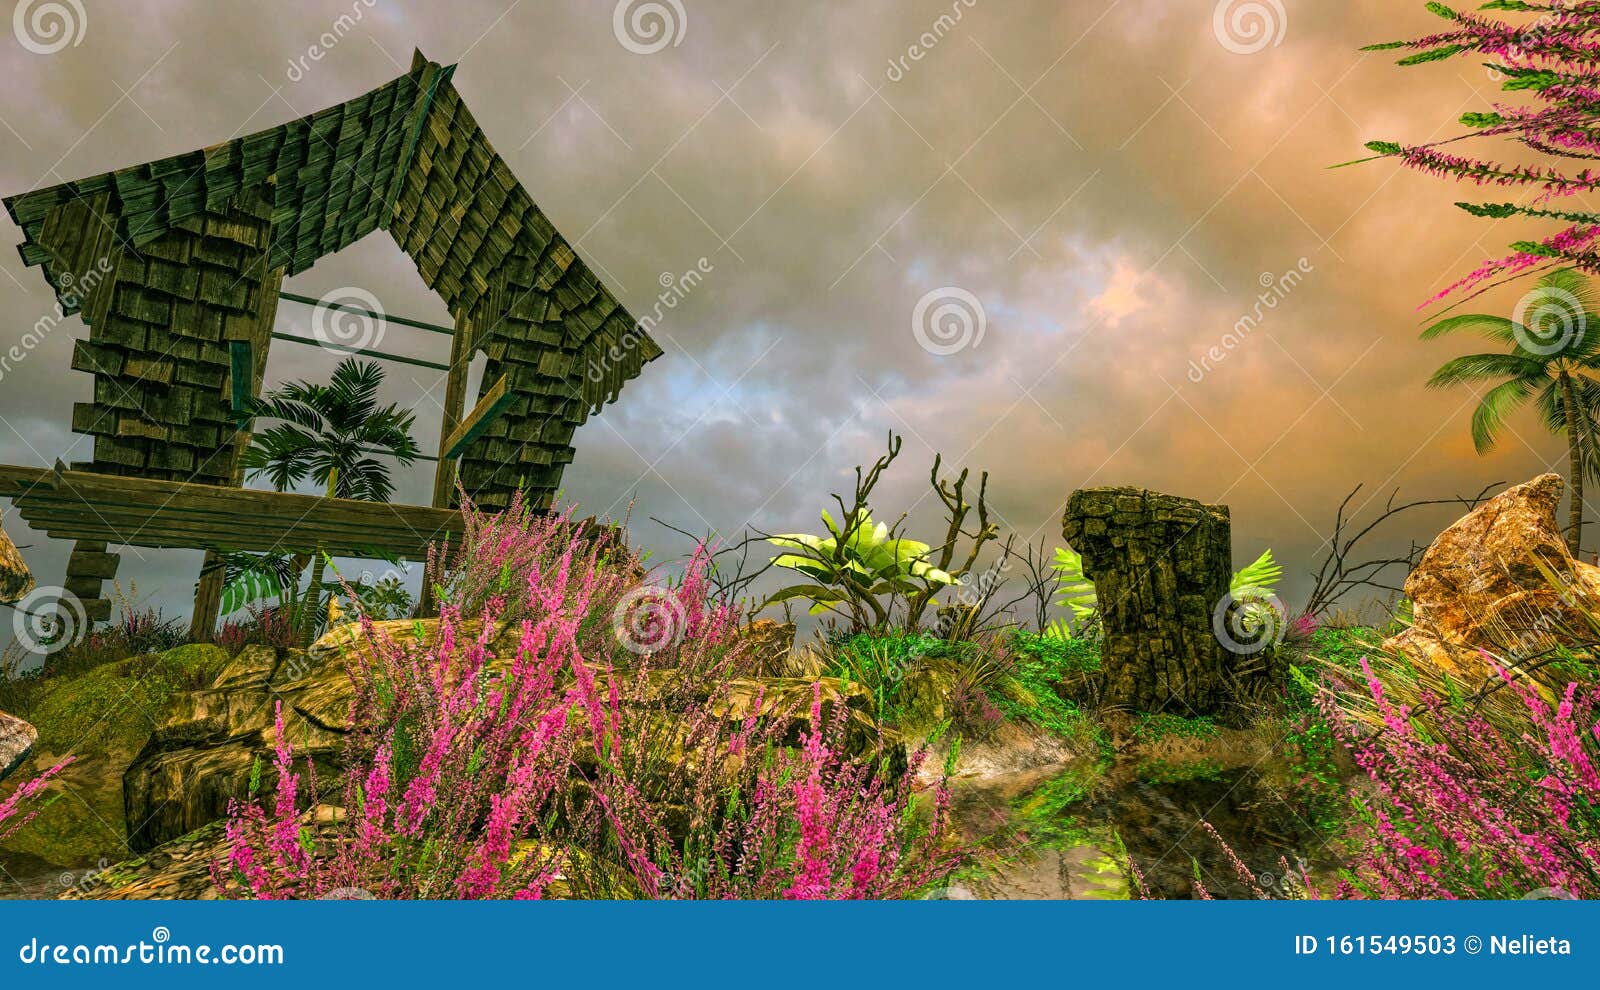 3D CG Ruins in Nature Background Stock Illustration Illustration of computer, water: 161549503